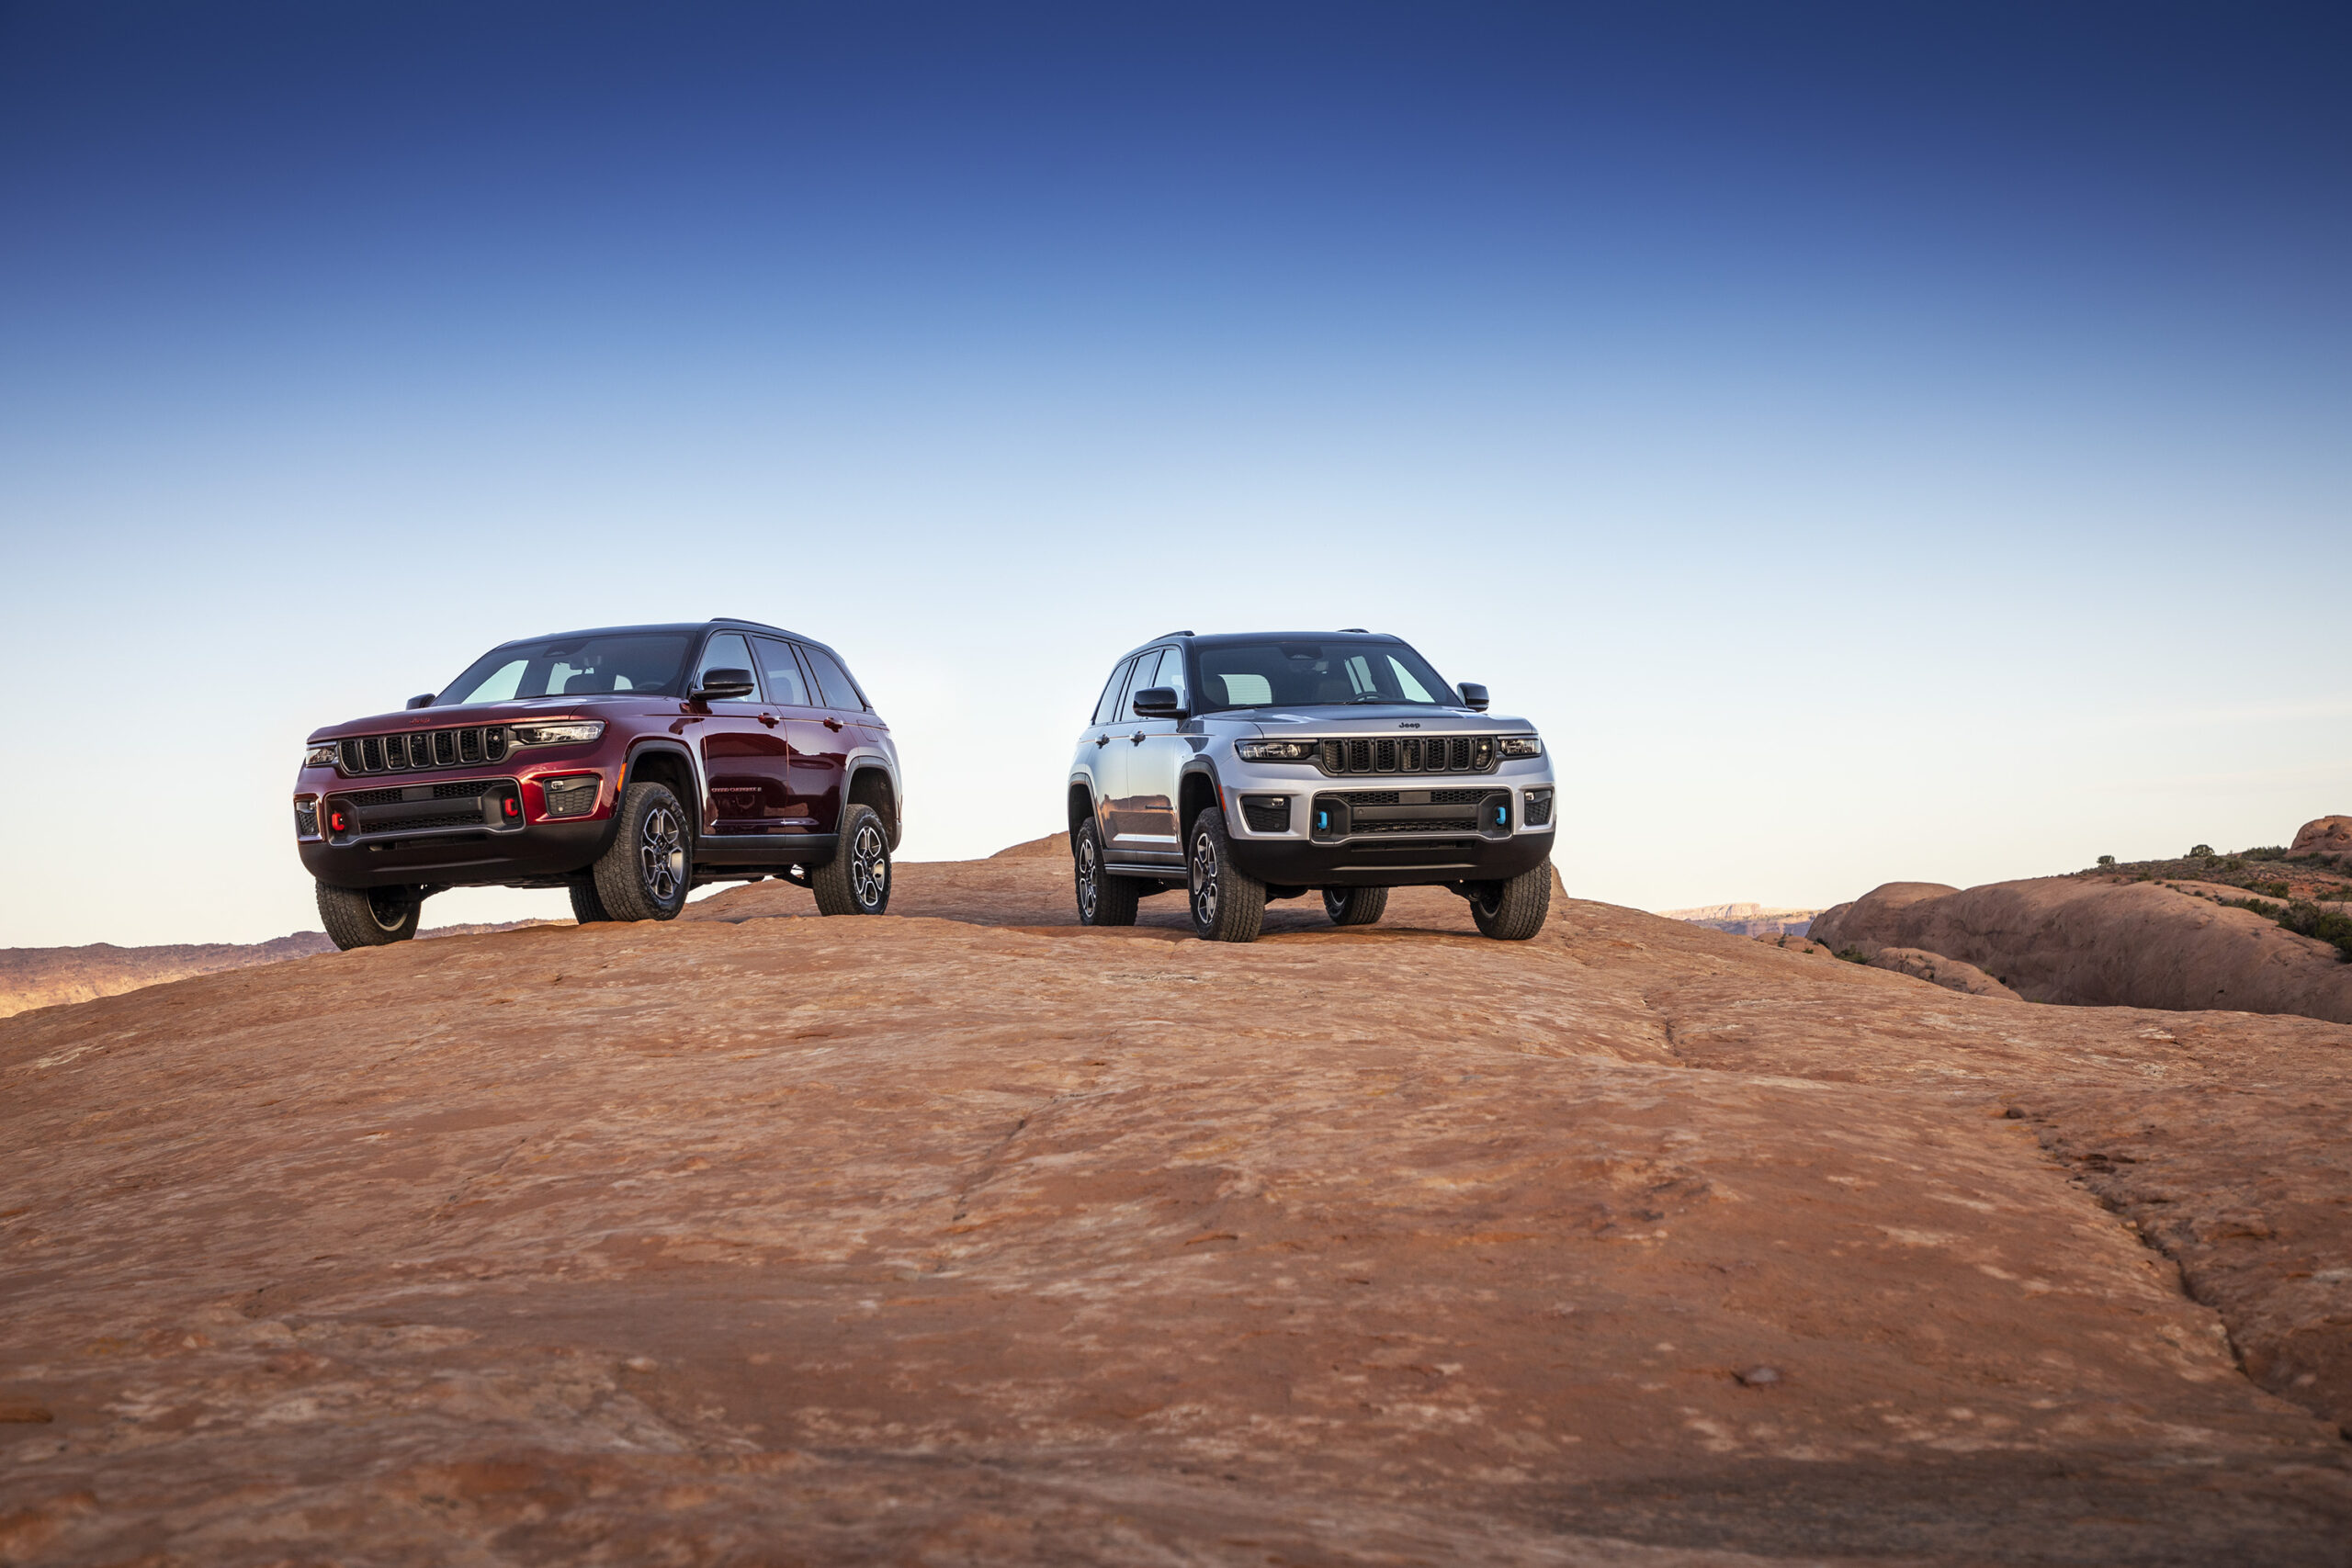 All-new 2022 Jeep® Grand Cherokee Trailhawk (left) and Trailhawk 4xe